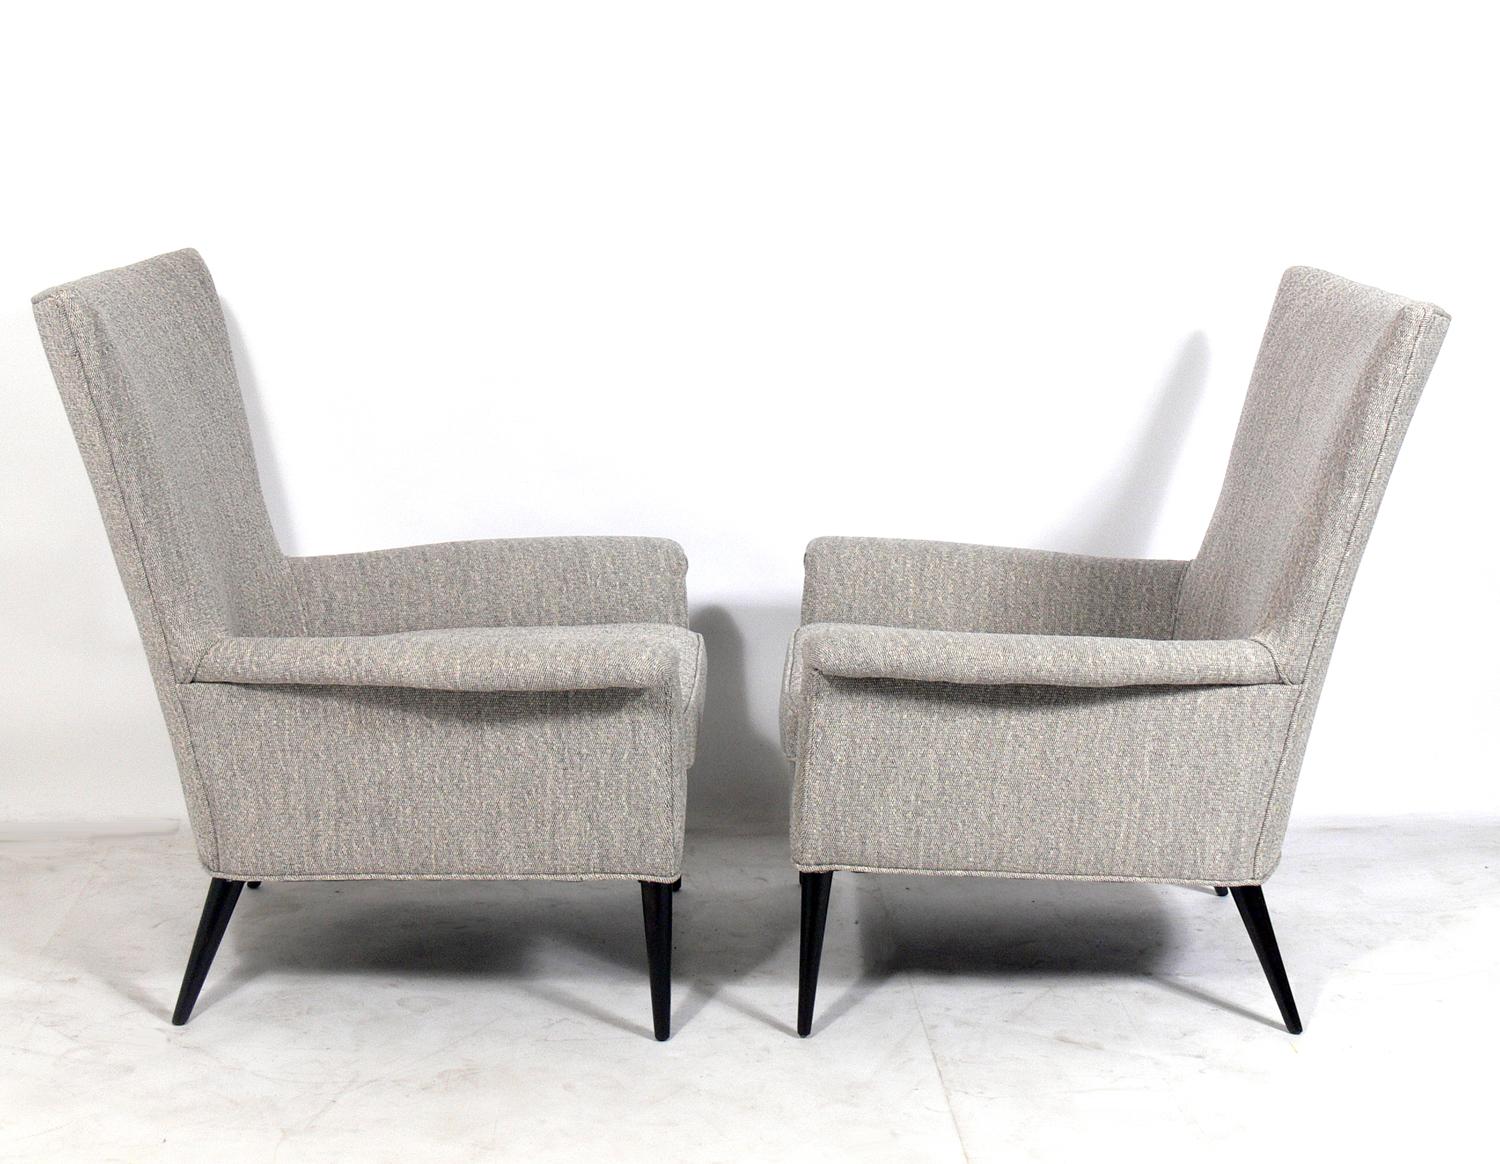 Pair of curvaceous lounge chairs, designed by Paul McCobb for Custom Craft, American, circa 1950s. They have been reupholstered in a grey and ivory textured fabric and the legs have been refinished in an ultra-deep brown color.